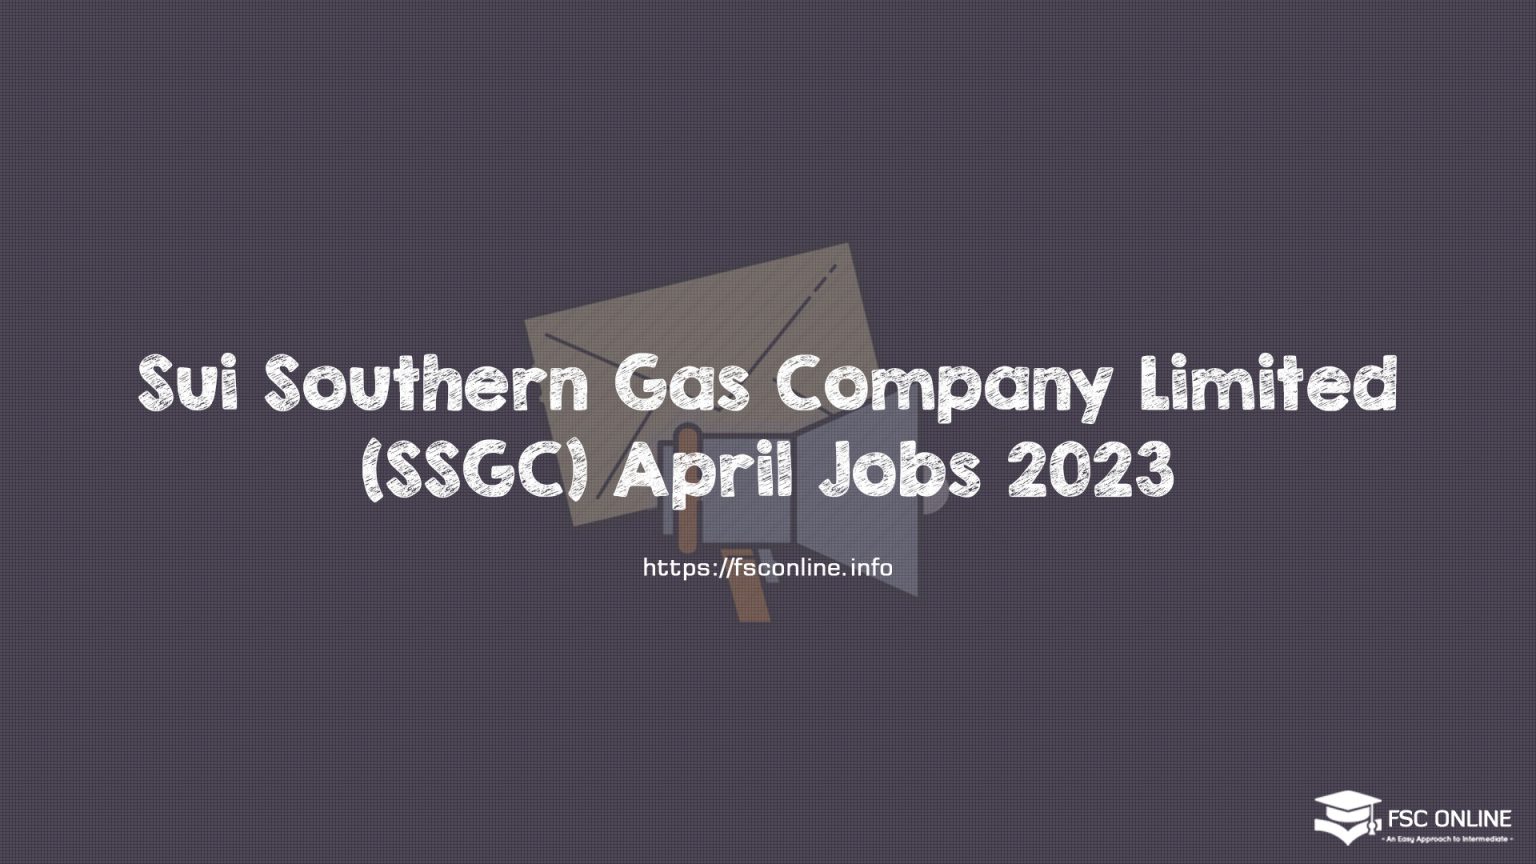 Sui Southern Gas Company Limited (SSGC) April Jobs 2023 